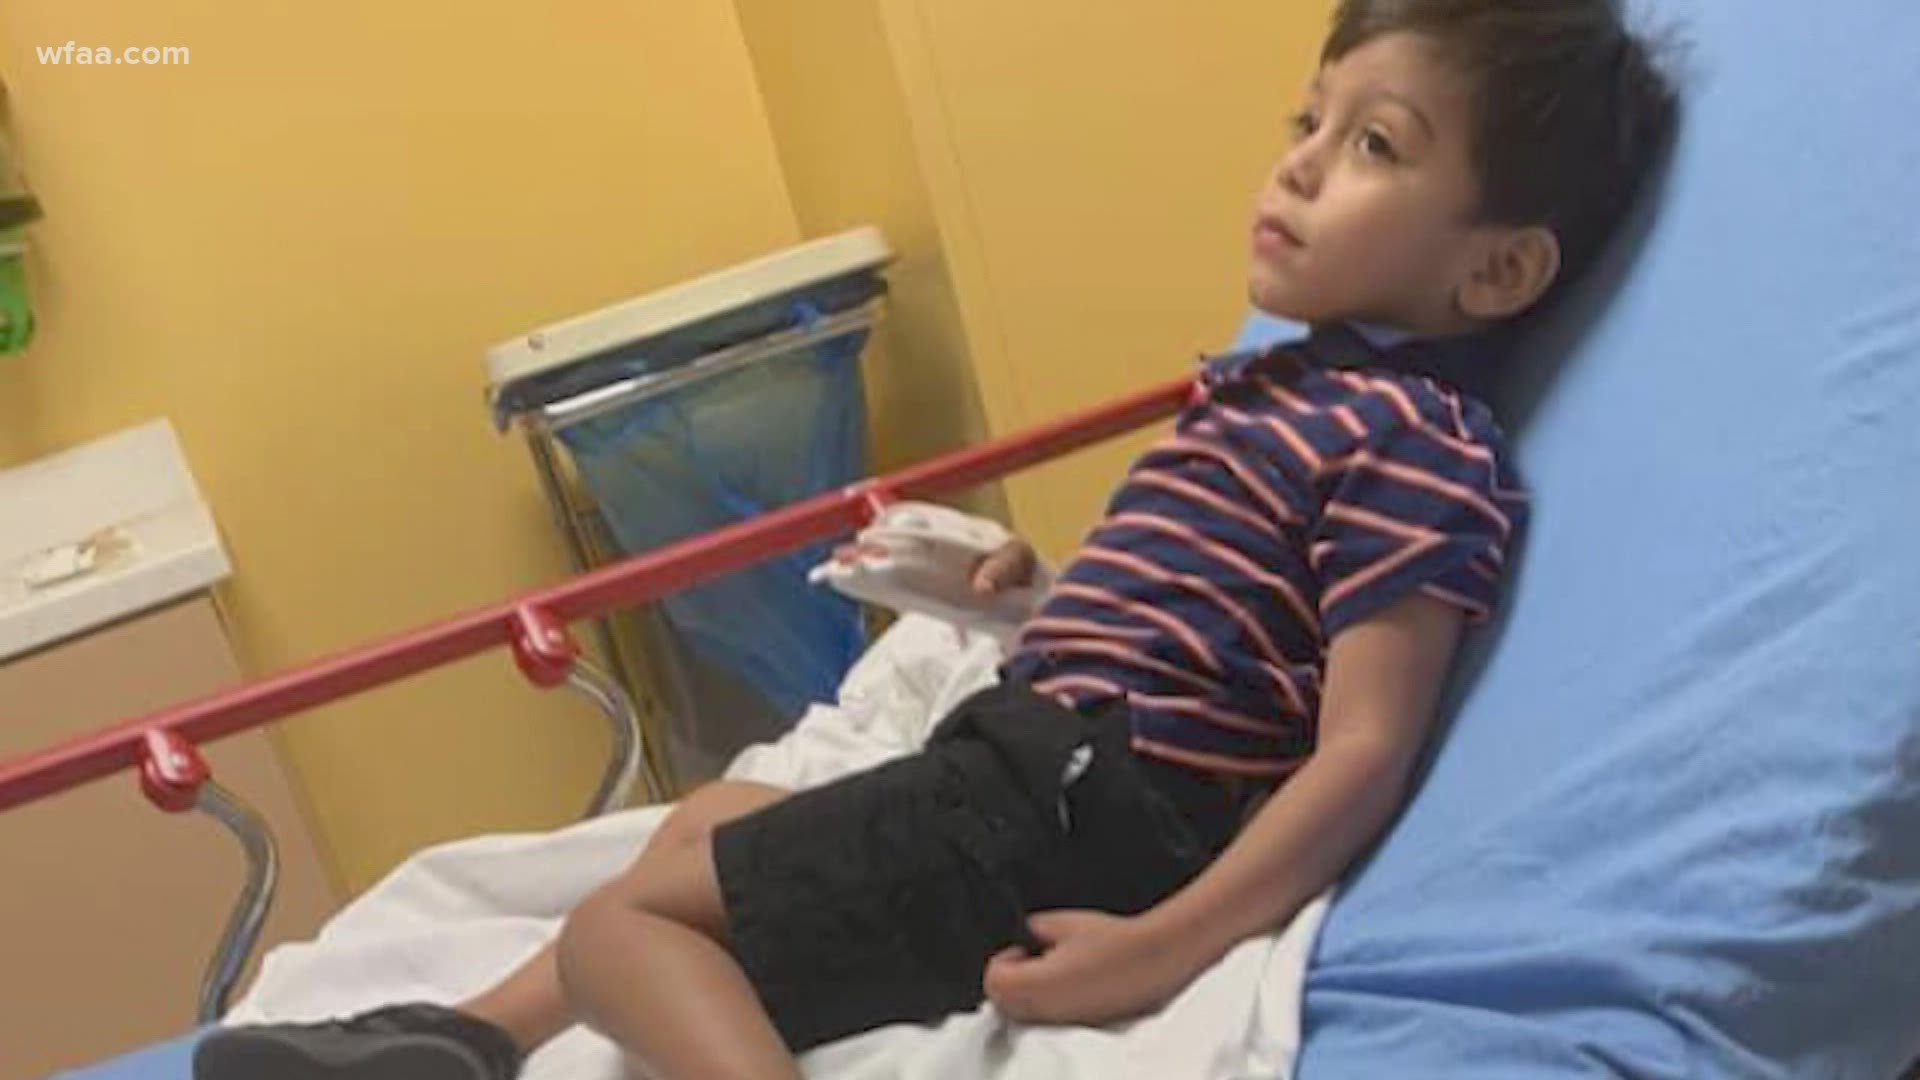 A 3-year-old boy was diagnosed with Kawasaki after three trips to Children's Medical Center of Plano.